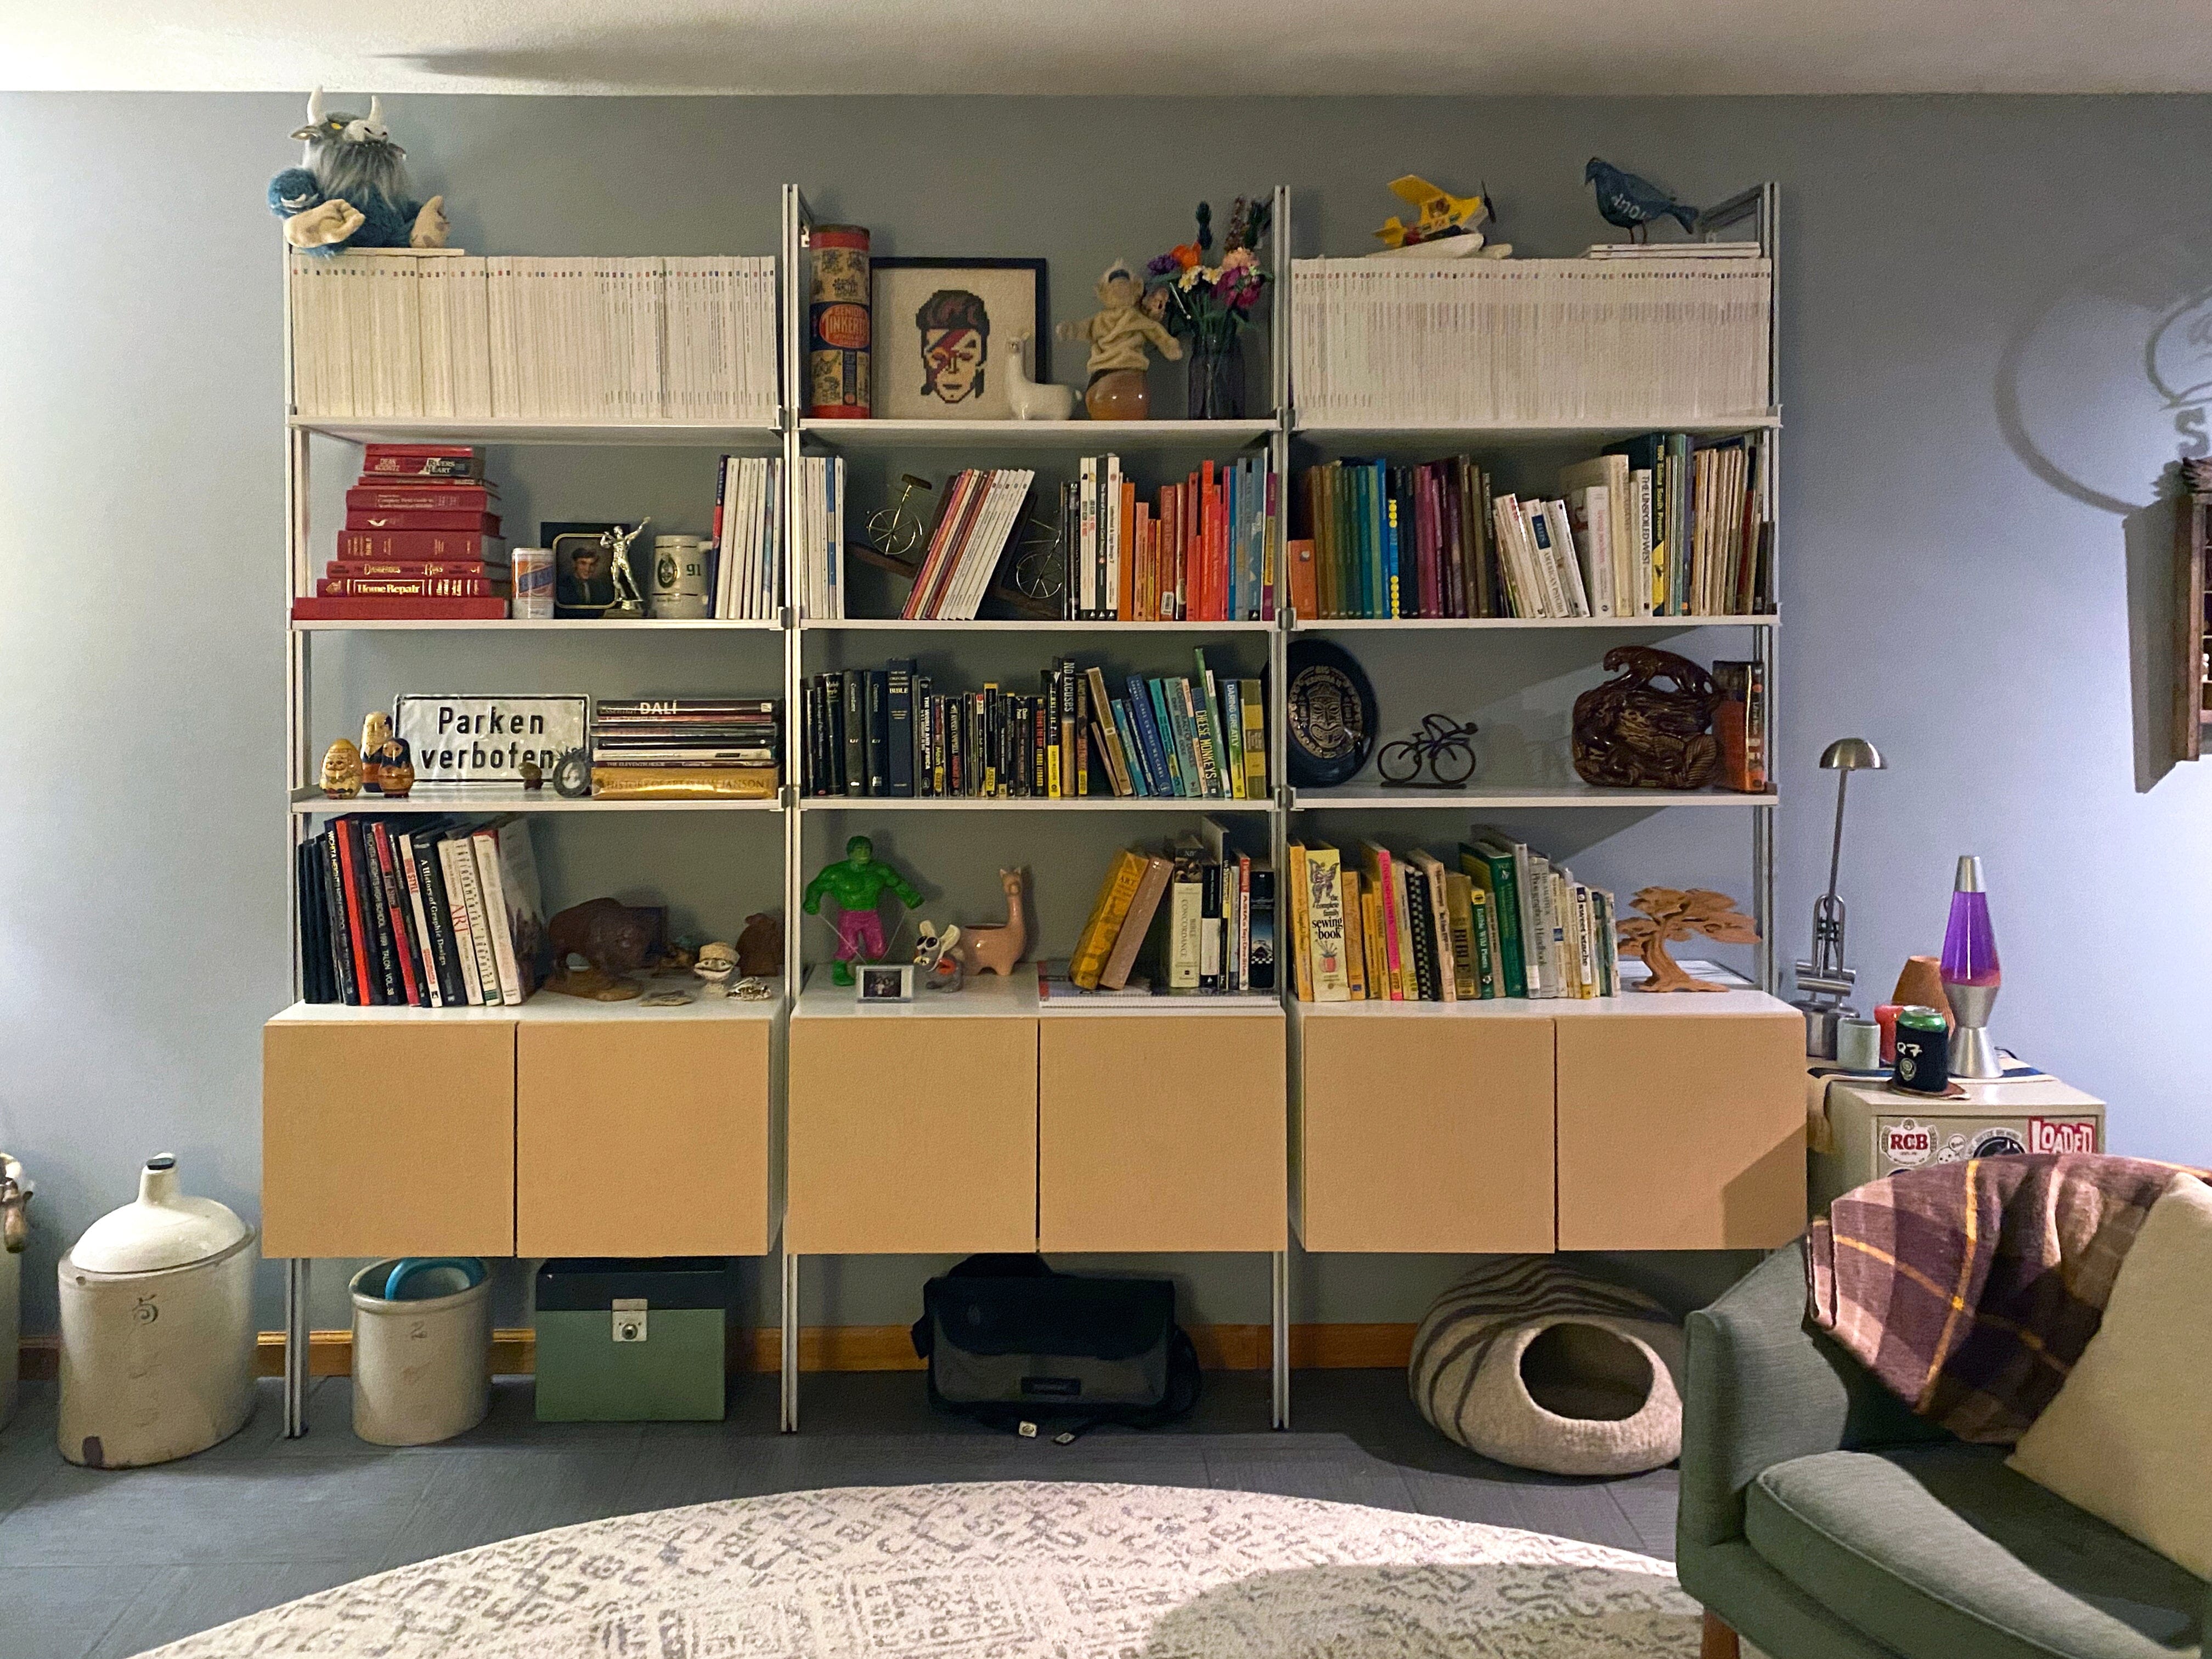 Couples’ New Shelves ‘Really Tie the Room Together’